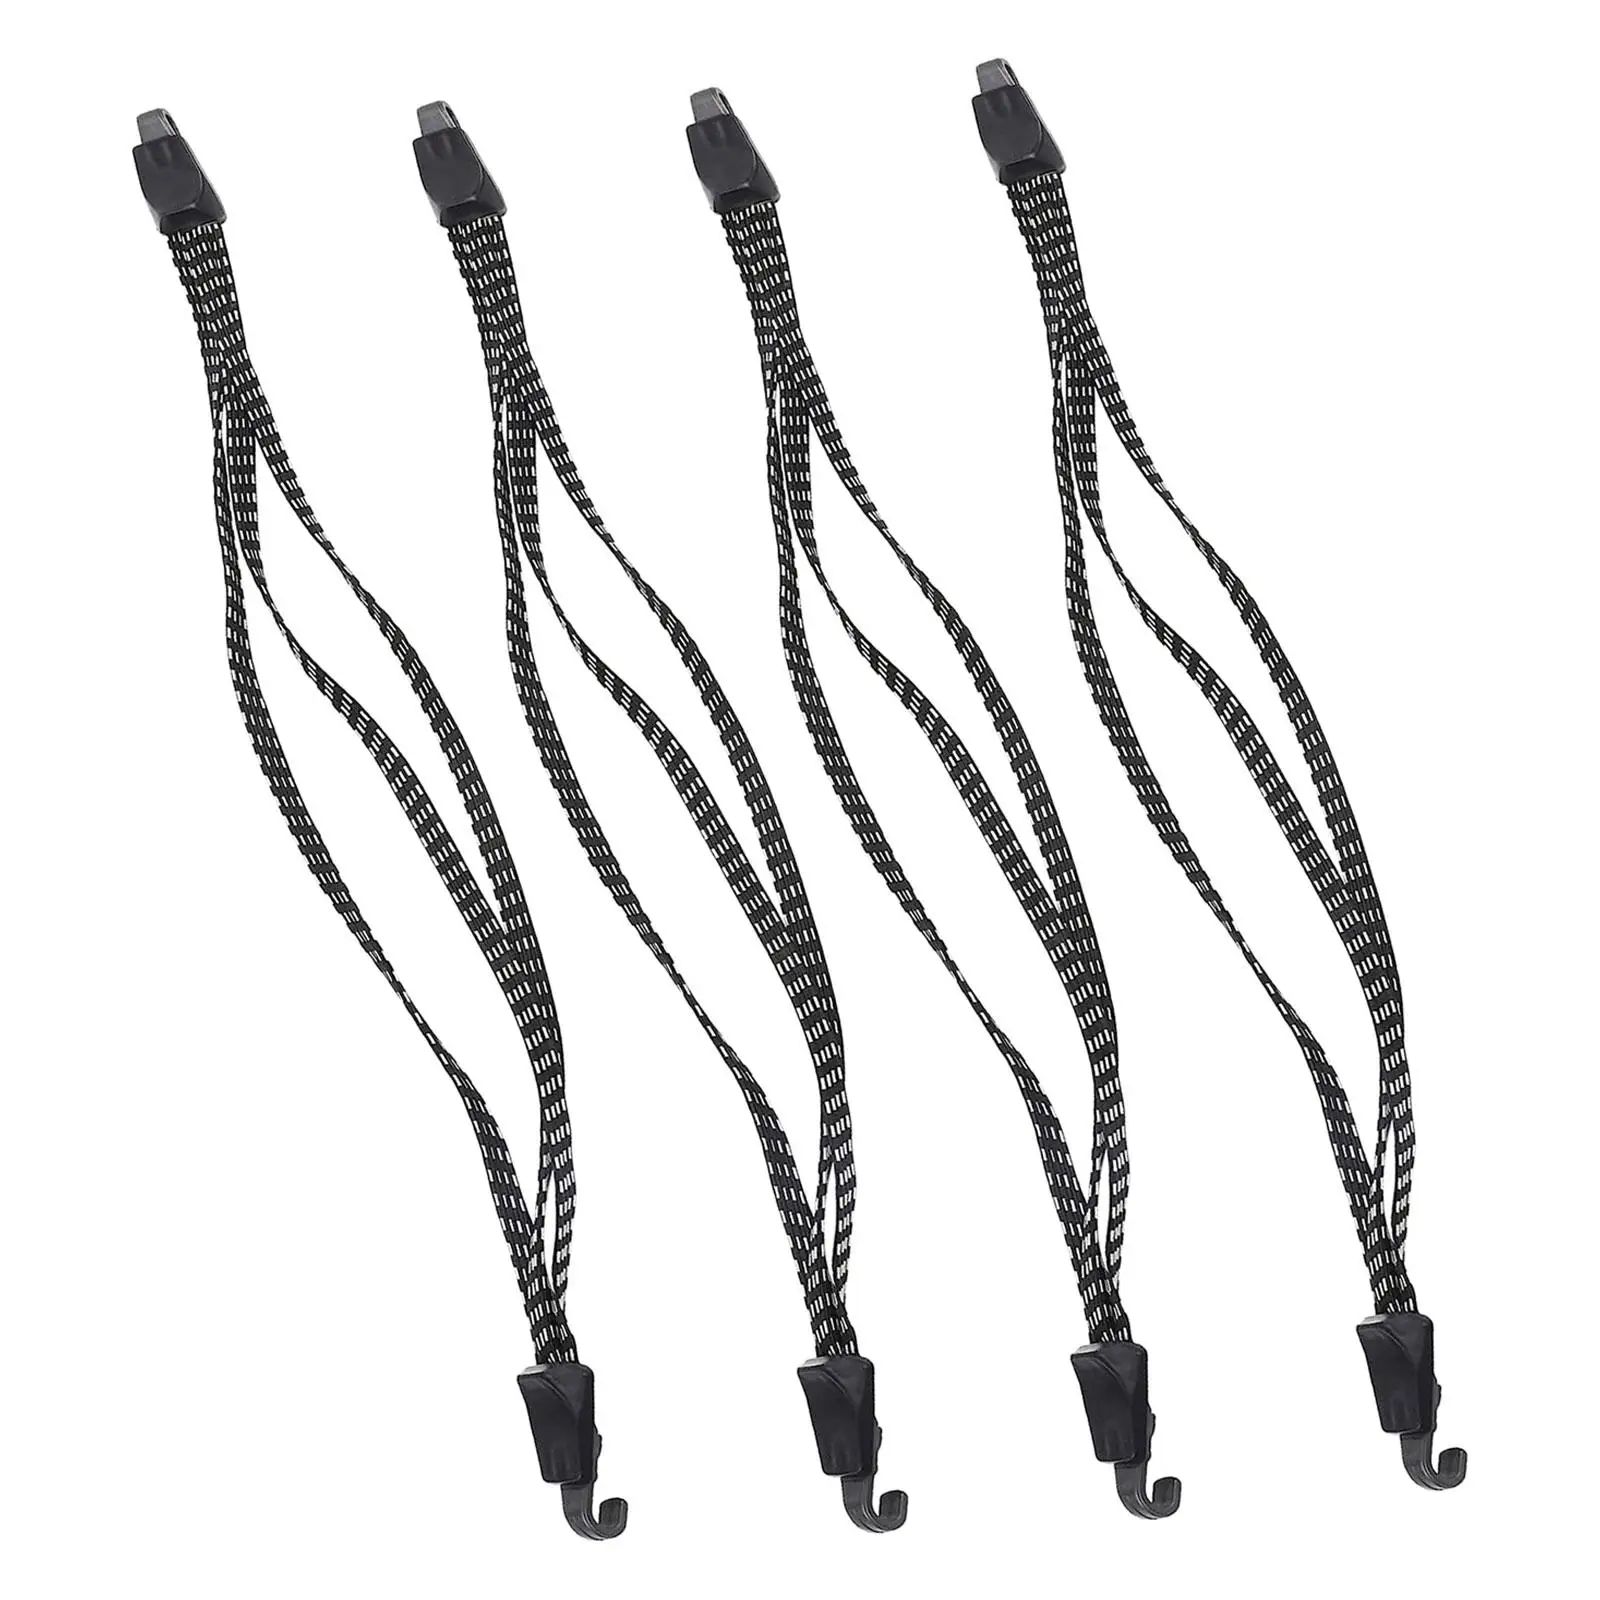 4x Motorcycle Luggage Rack Tie Down Straps for Bicycle Cargo Cart Tie Down